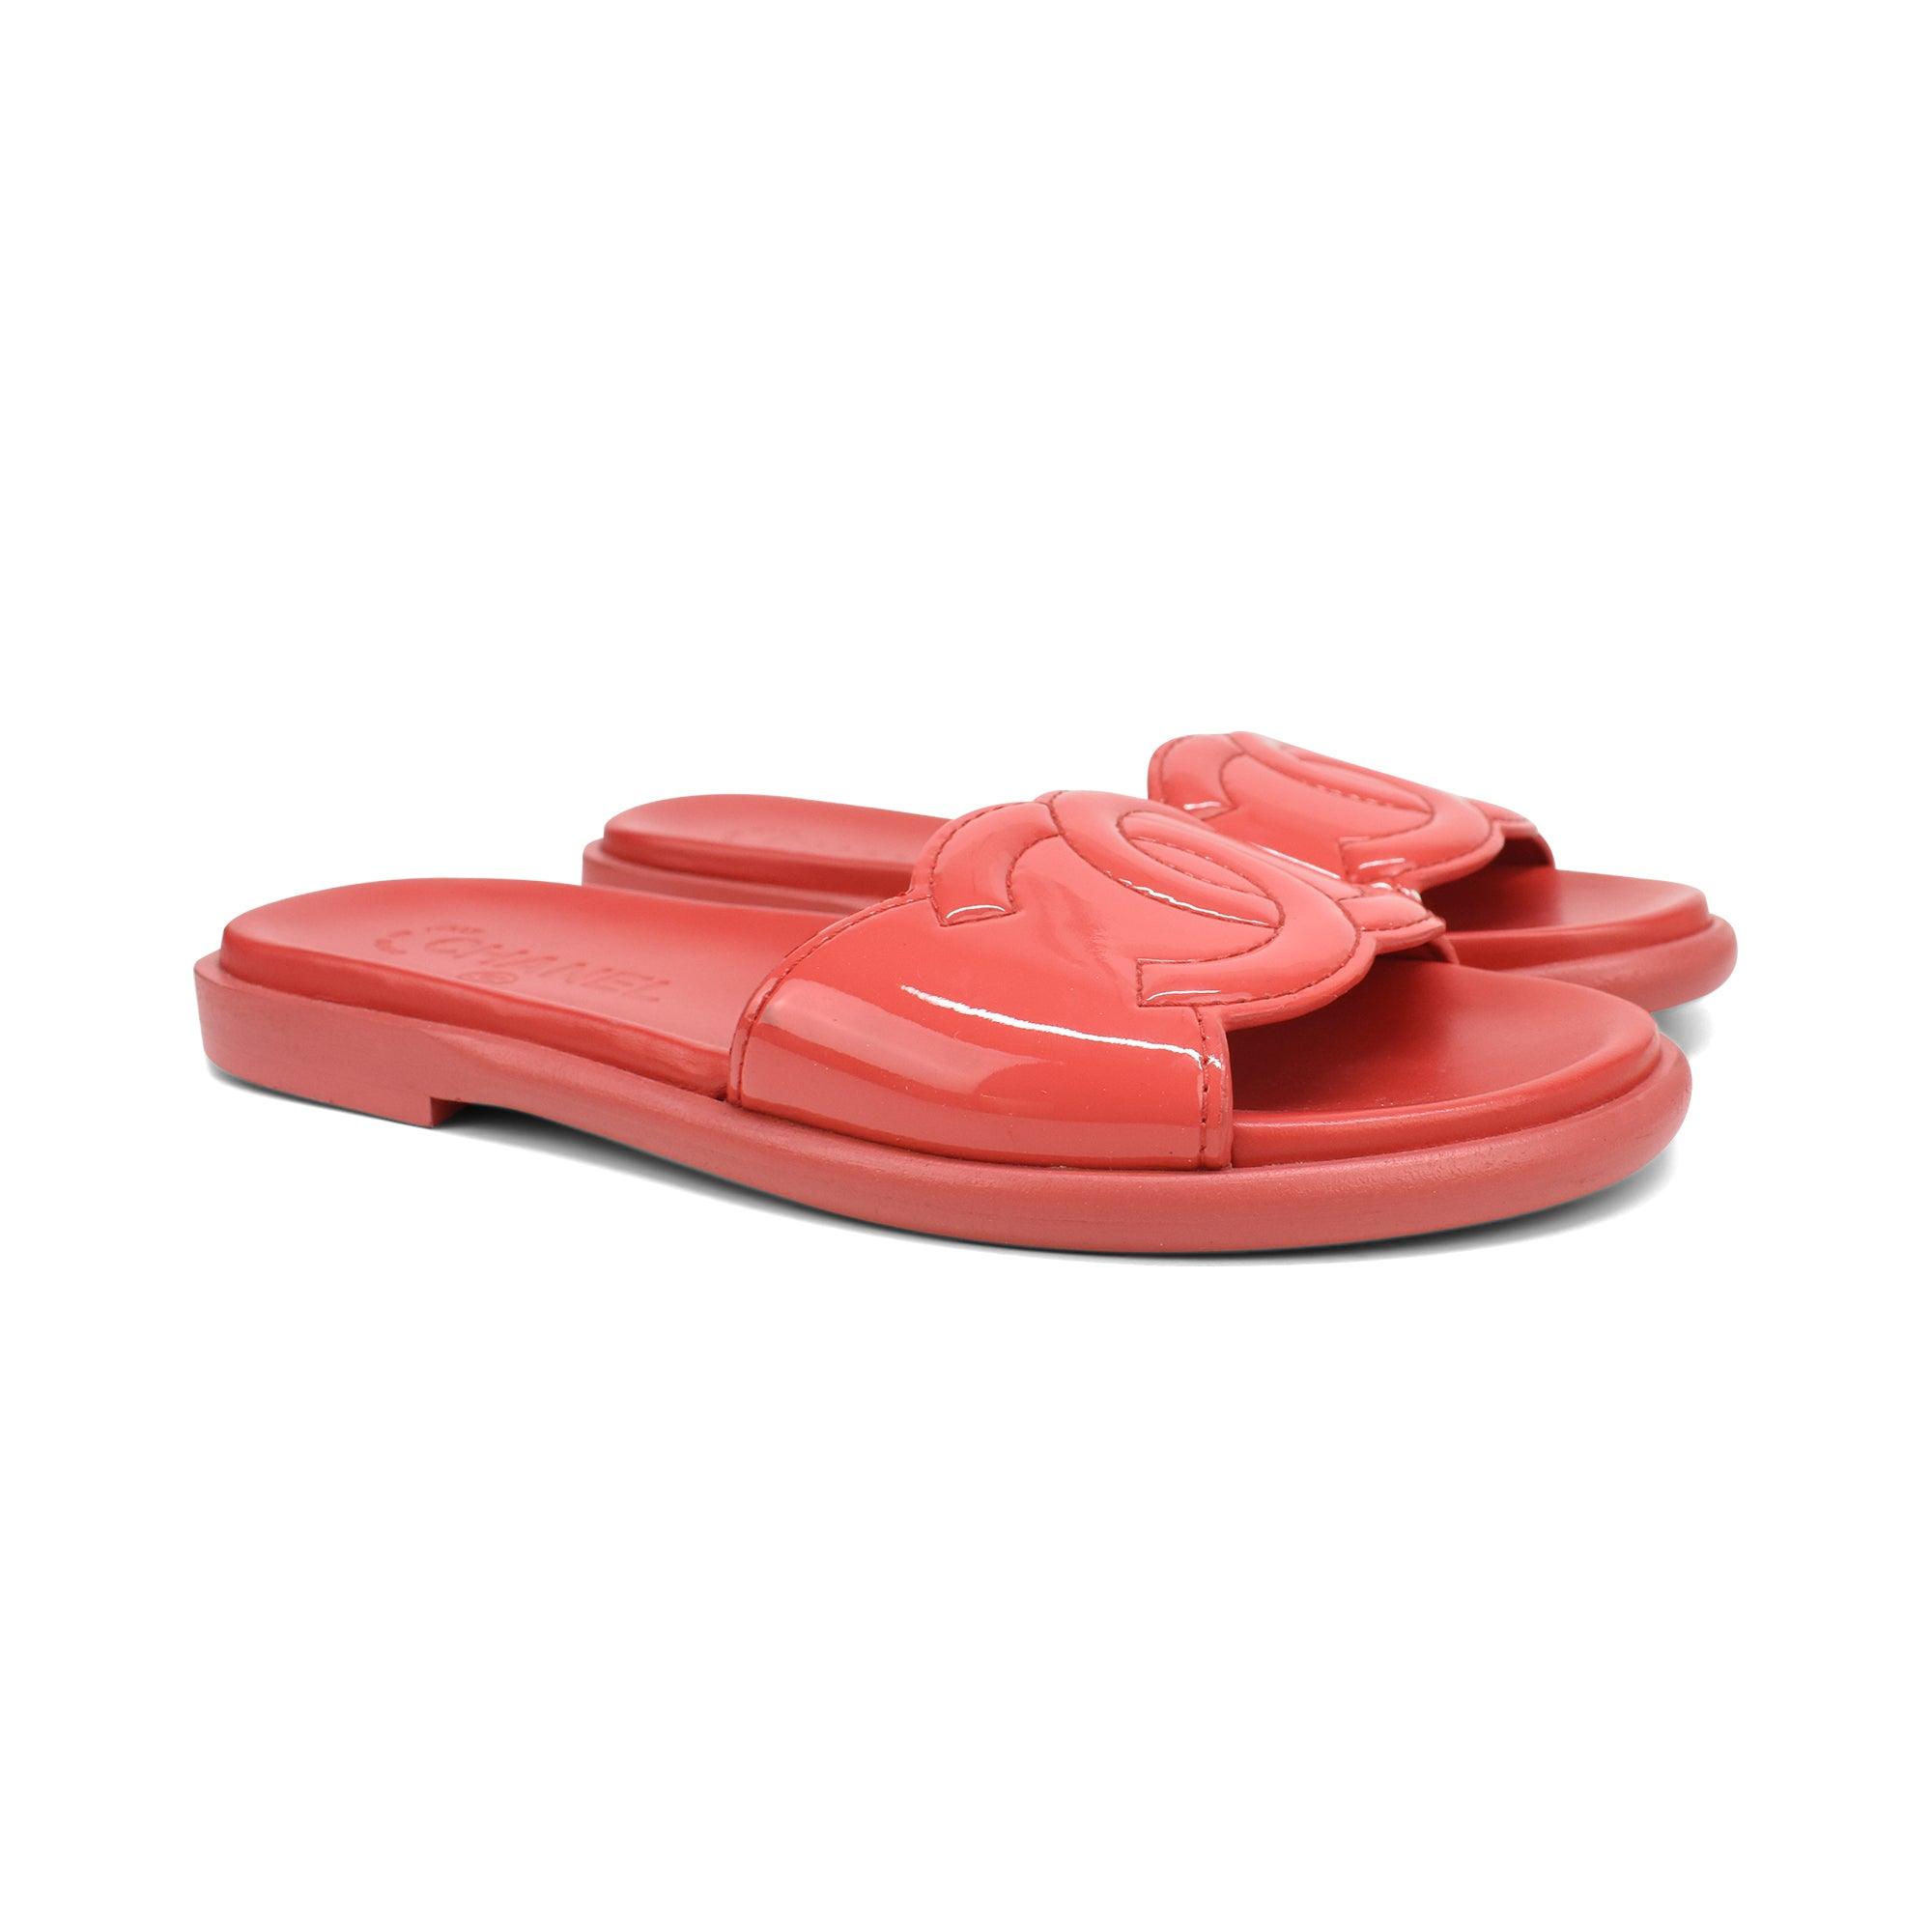 Chanel Sandals - Women's 36.5 - Fashionably Yours